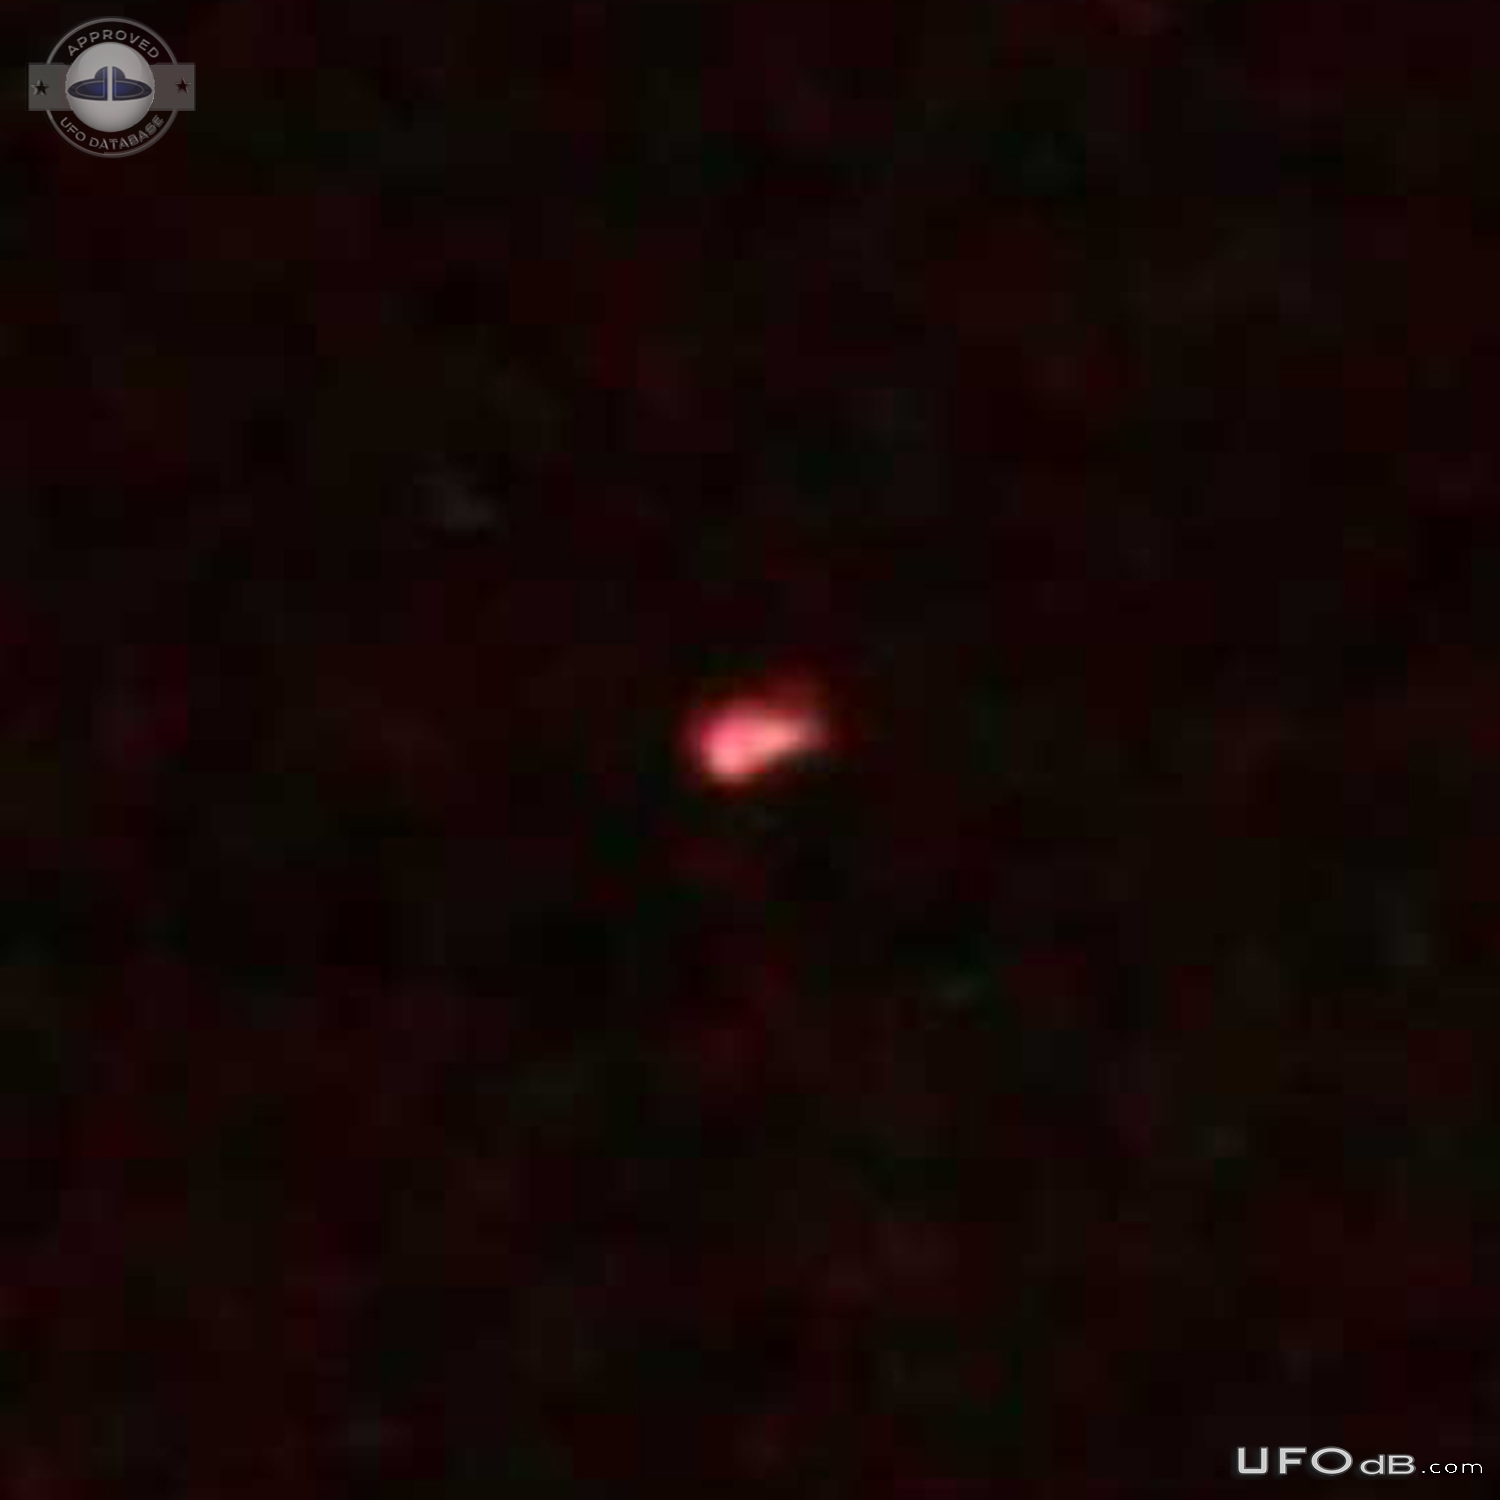 There was an orange glowing UFO in the sky - Hamilton Ontario Canada 2 UFO Picture #772-3